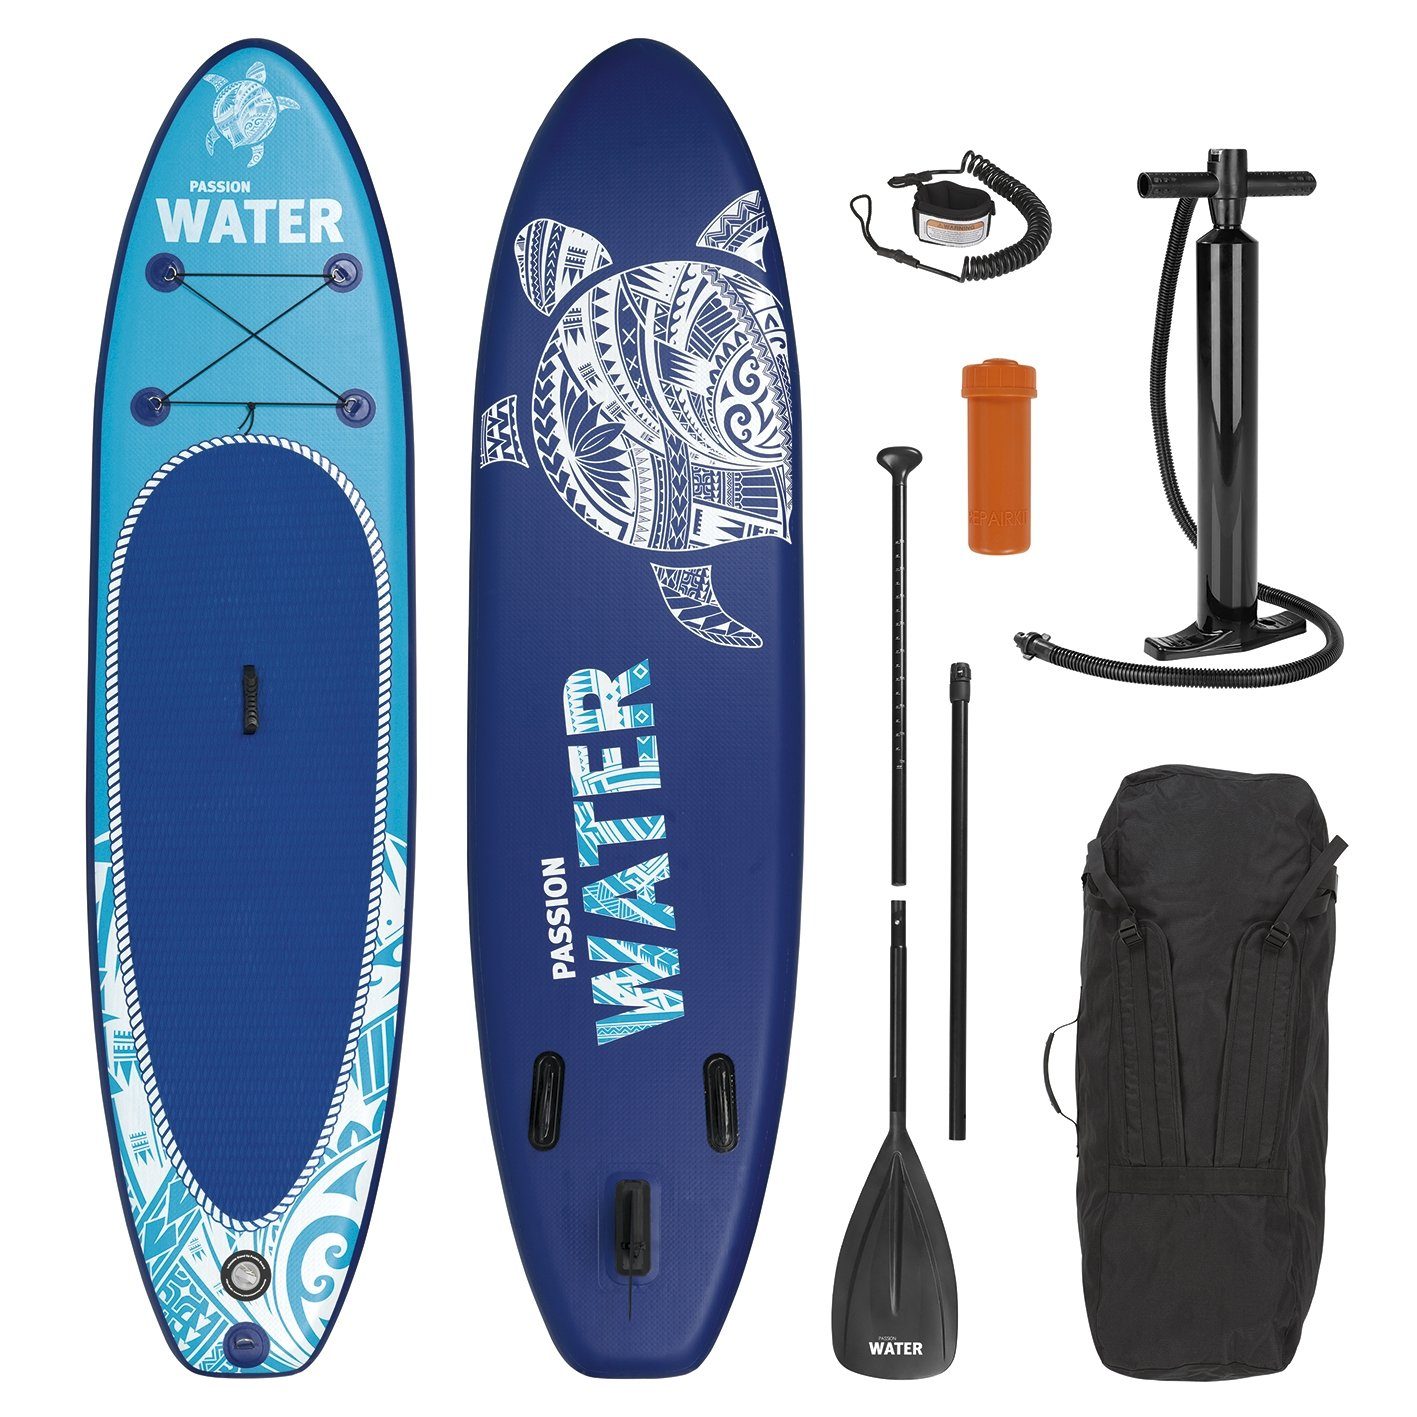 MAXXMEE Inflatable 110kg, Paddle-Board Board SUP Set inkl. SUP-Board, Stand Paddel Paddle cm, 300 Paddling blau/türkis up Board Stand-Up Komplett